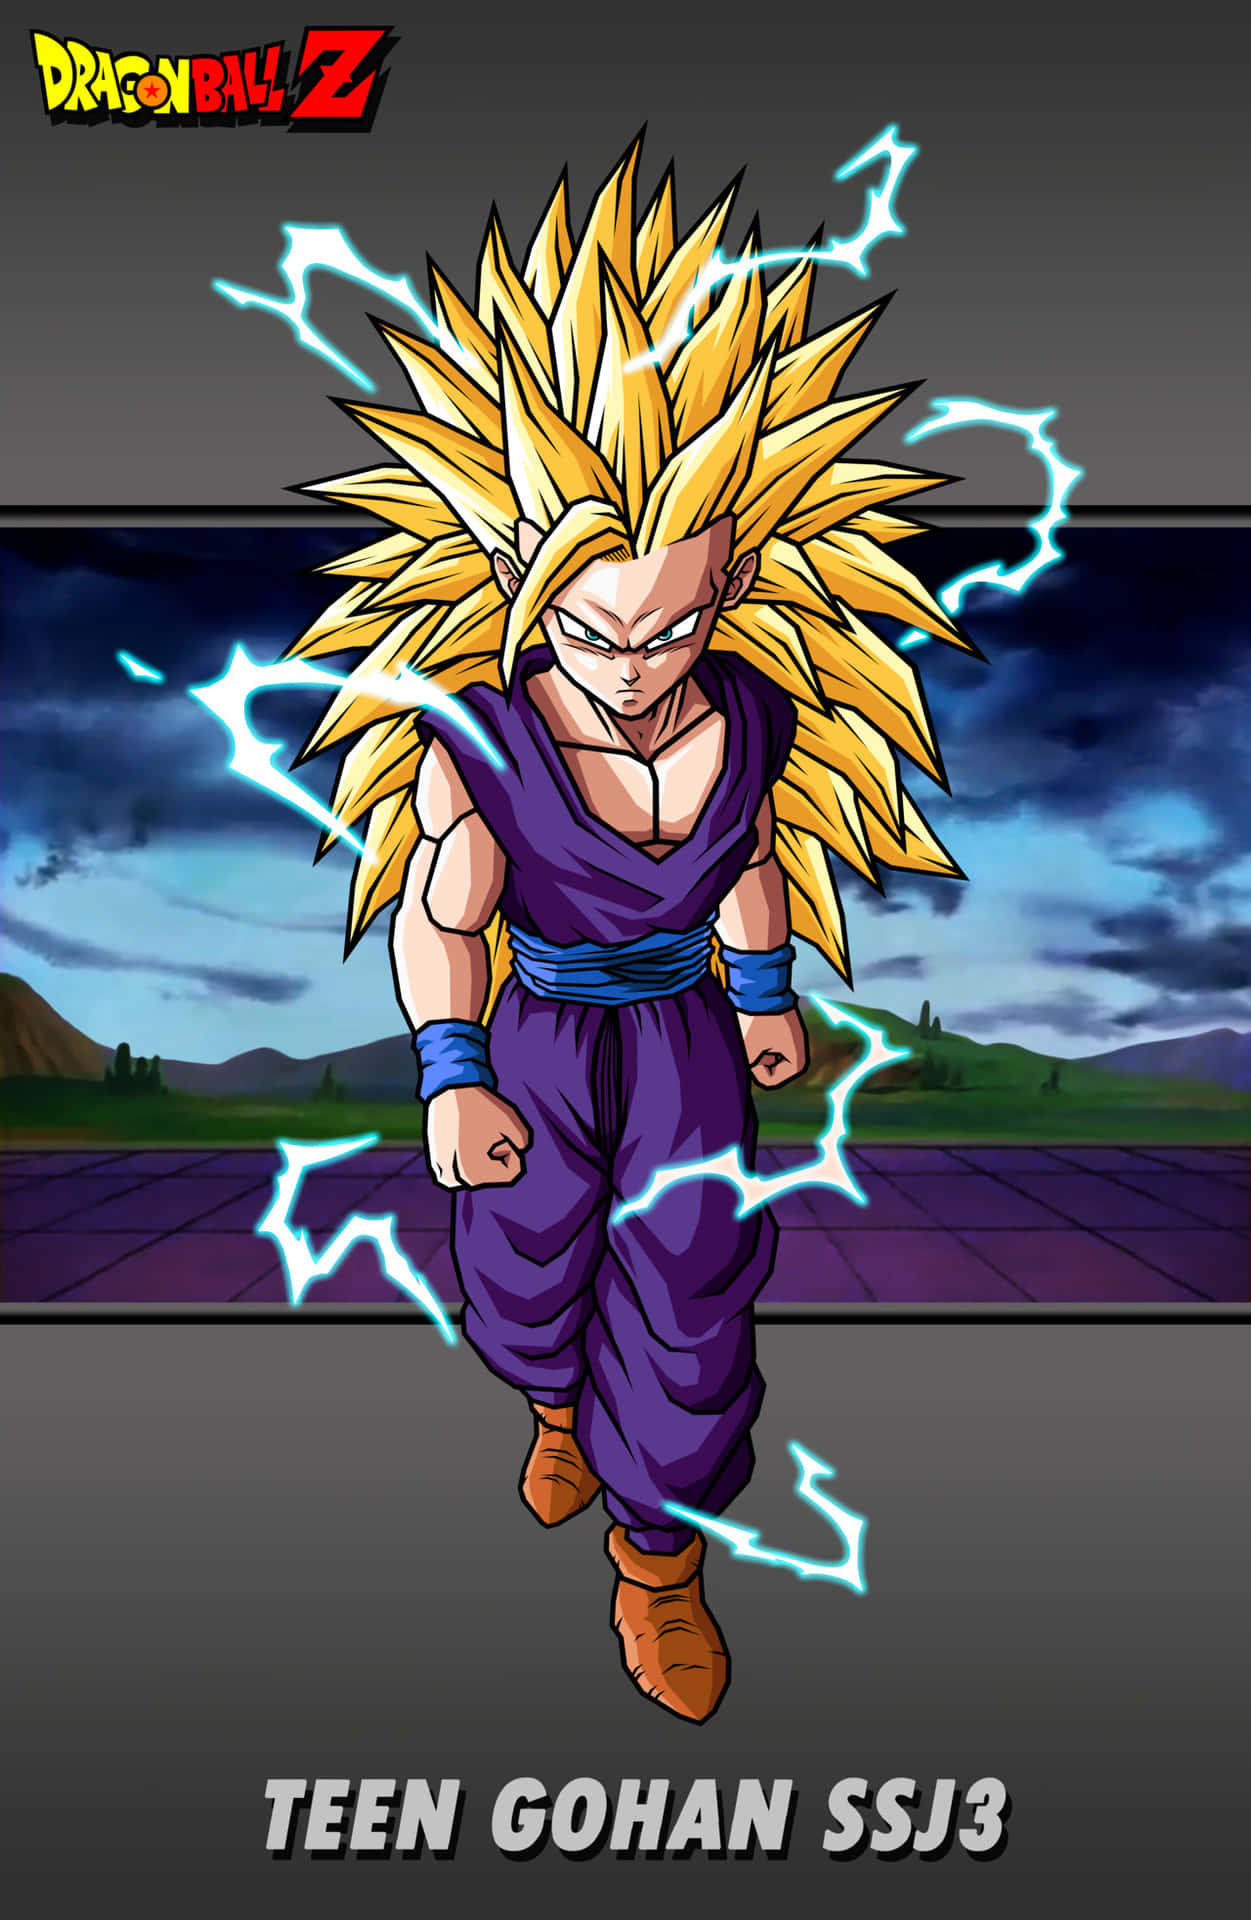 Teen Gohan is prepared to take on the evil Cell Wallpaper